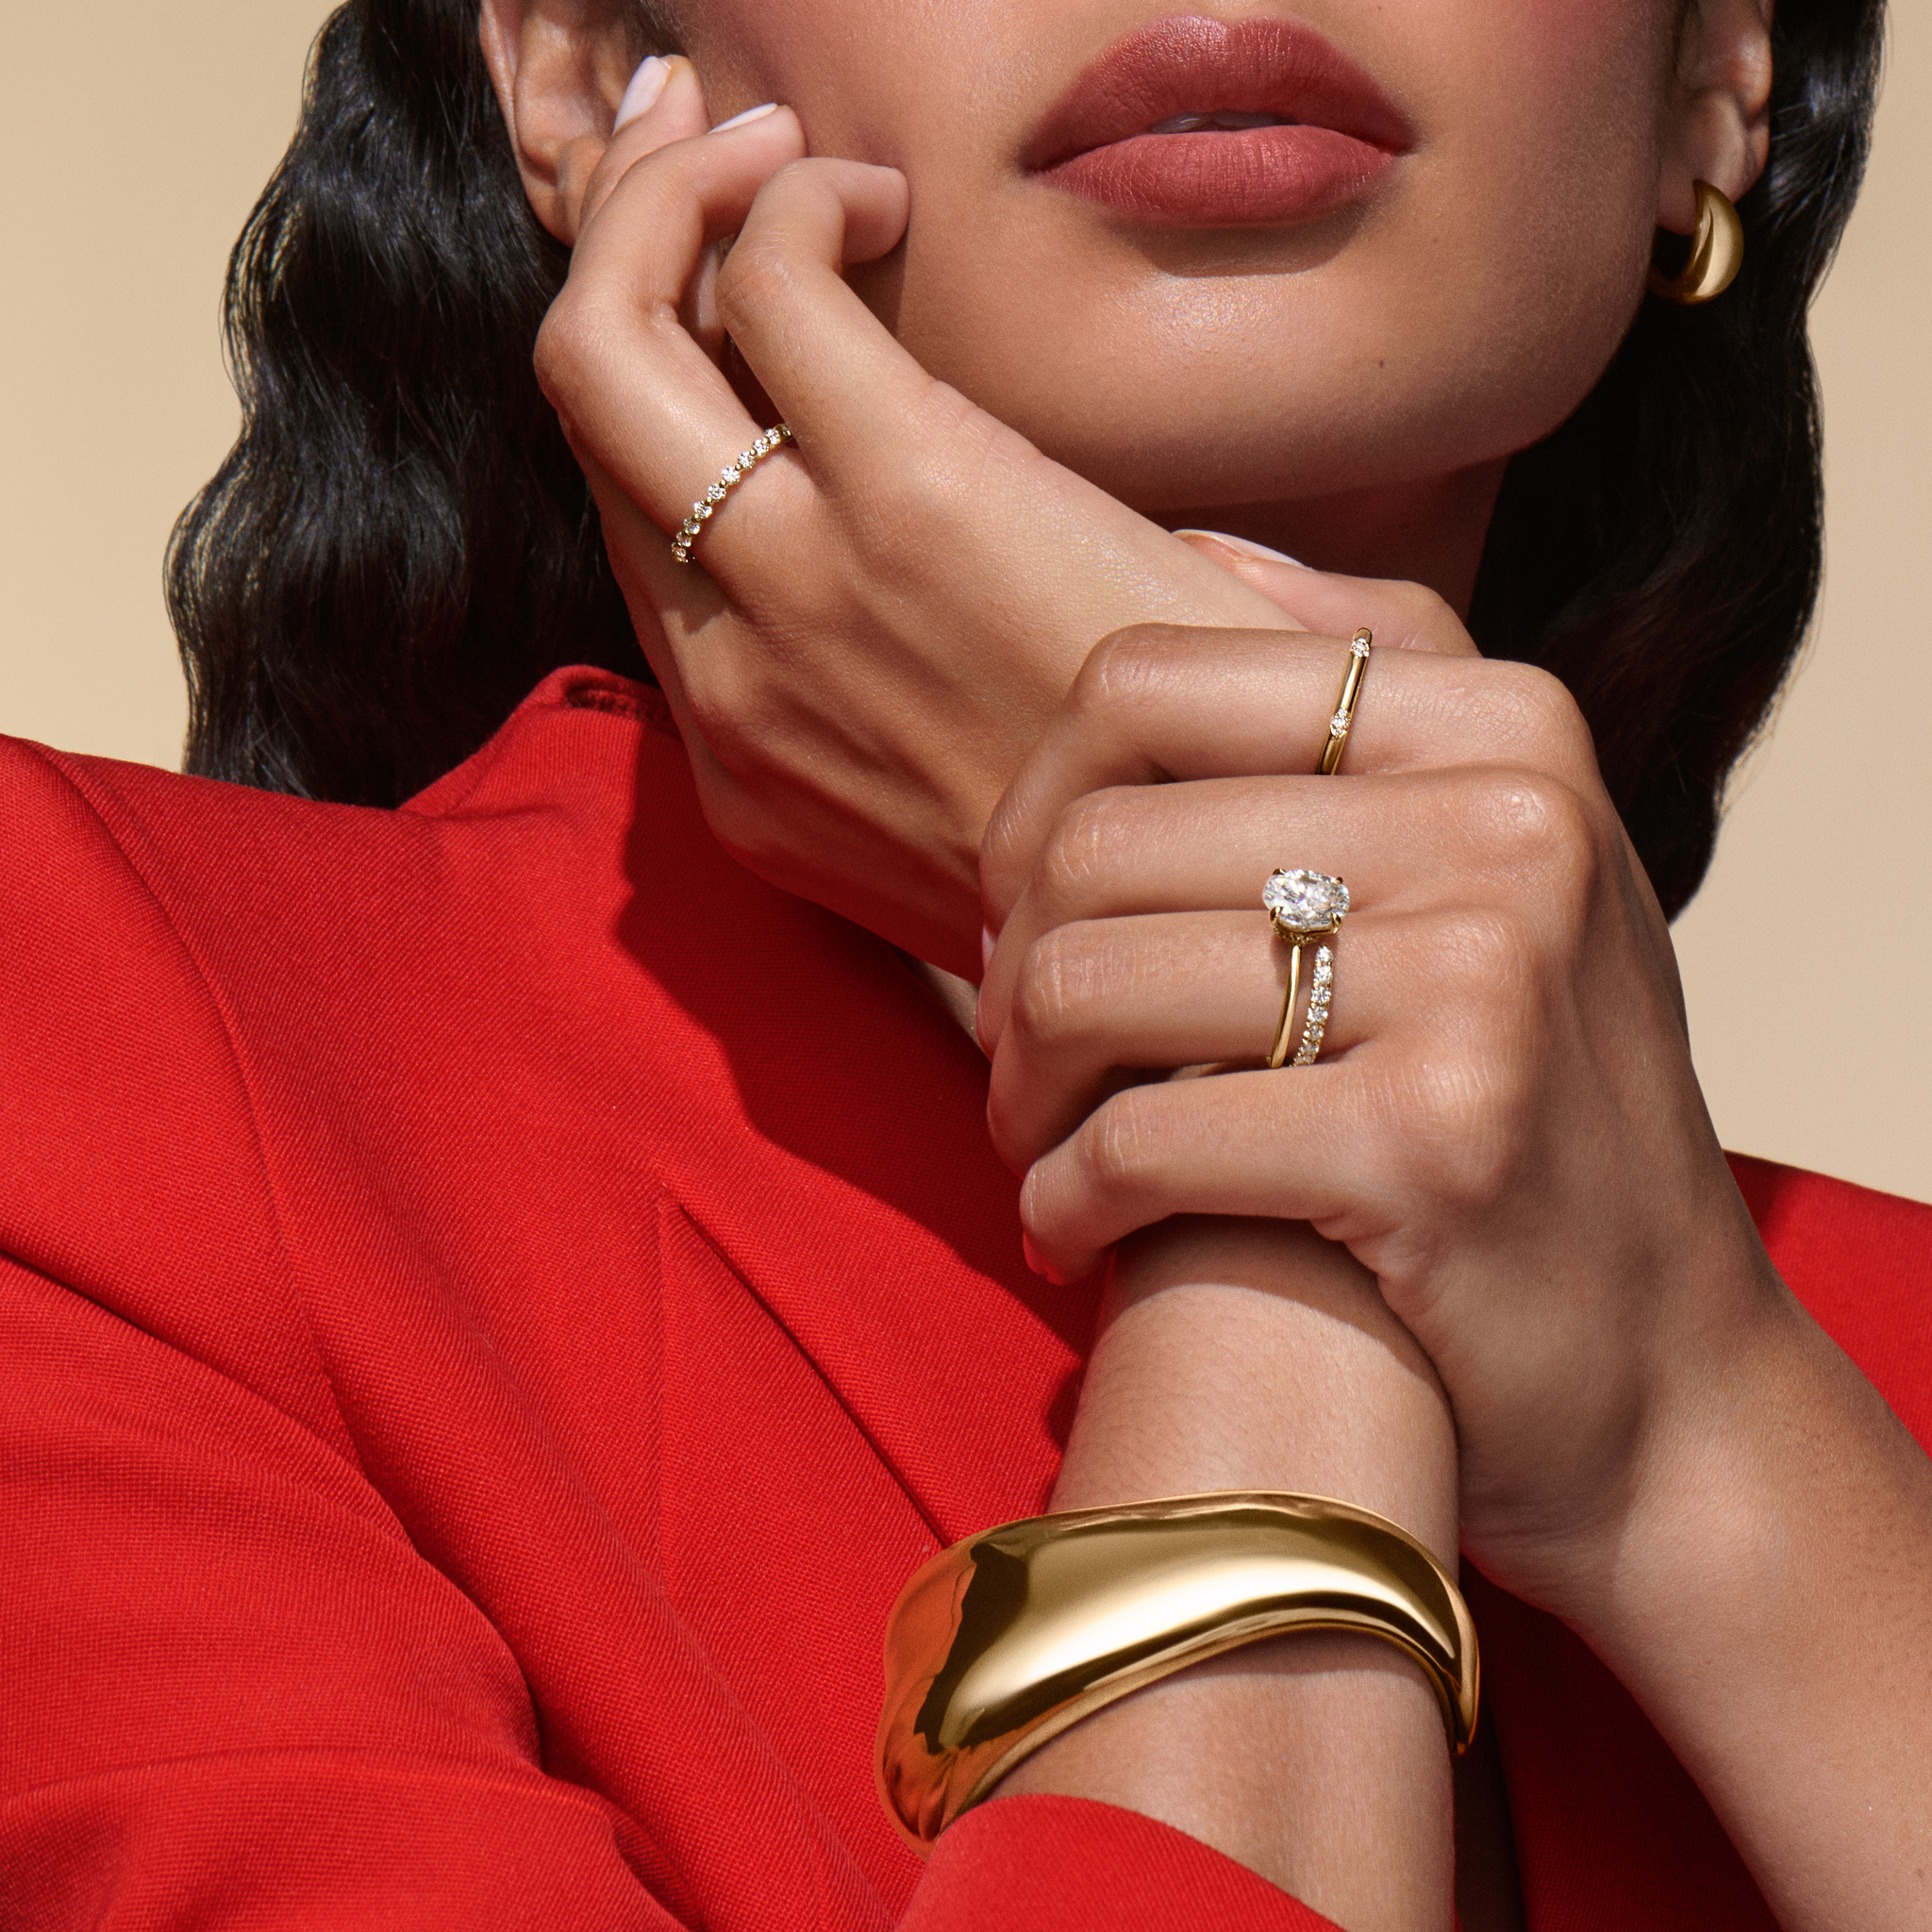 16 of the Best Jewelry Gifts to Brighten the Holidays This Year